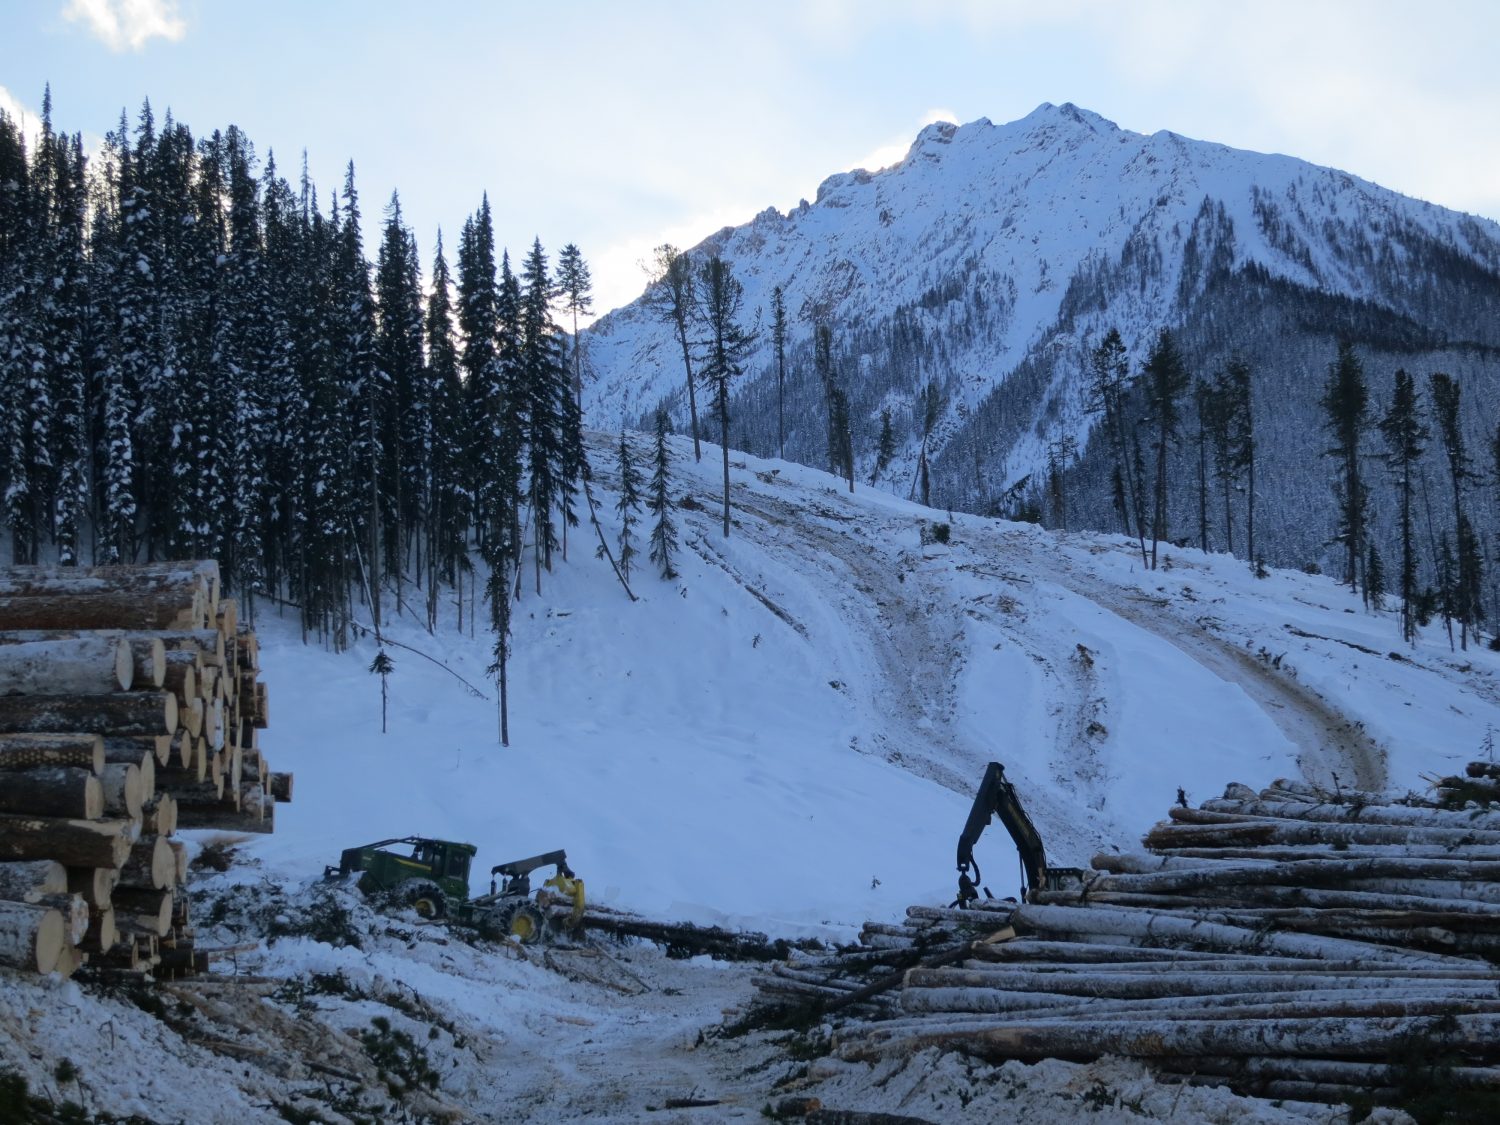 Forest Operations: Avalanche Safety Plan, Avalanche Risk Assessments and Avalanche Safety Program(s)